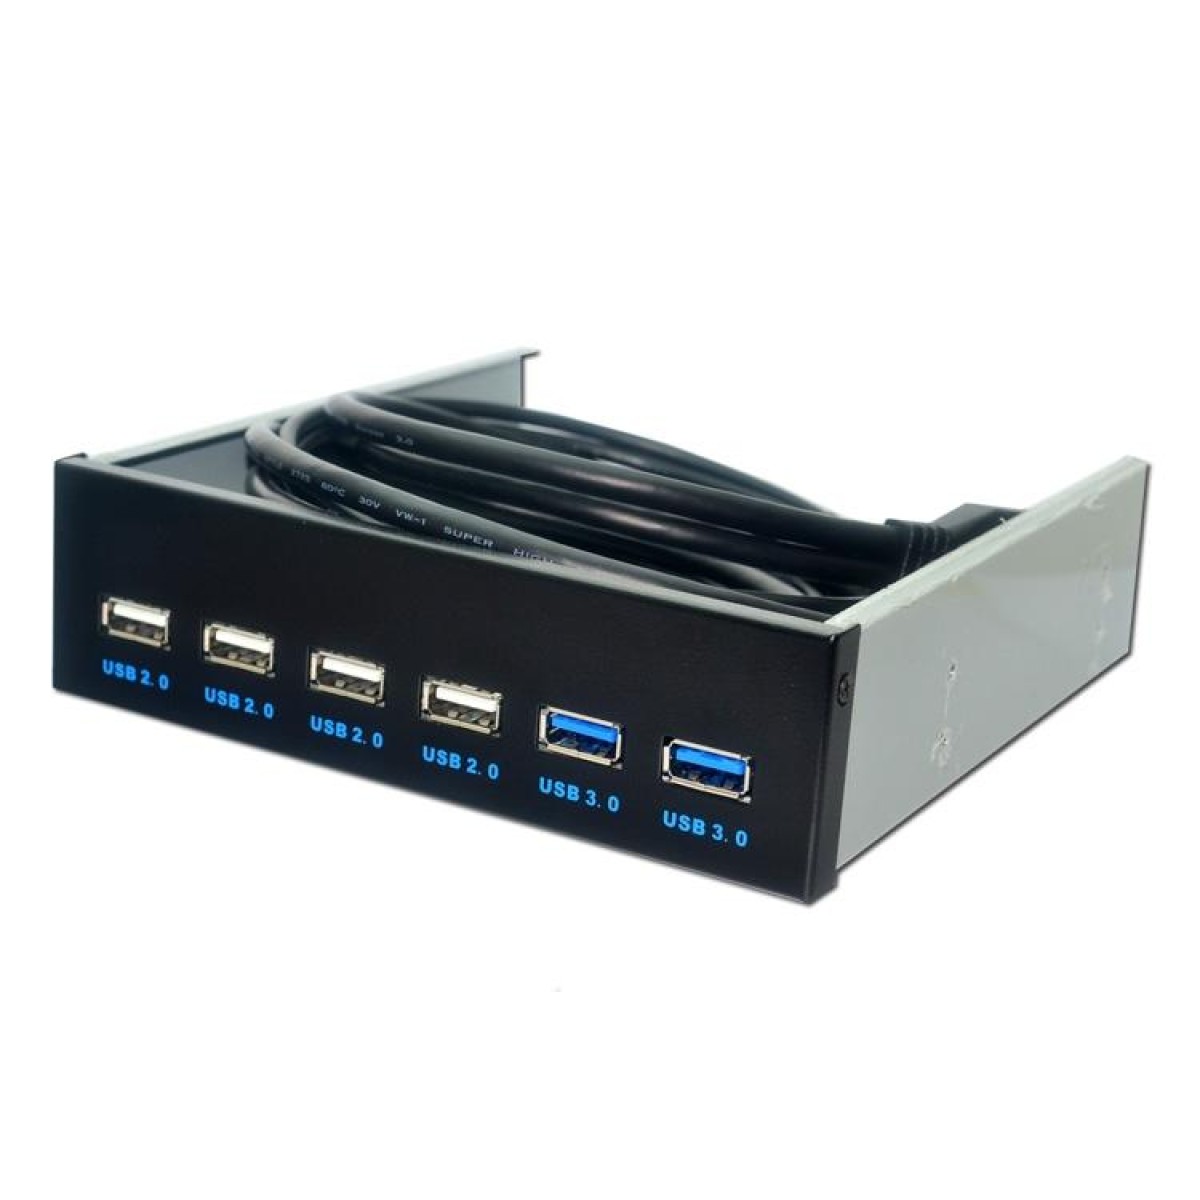 6 Ports 5.25 Inch Floppy Bay Front Panel With Power Adapter USB Hub Spilitter 2 Ports USB 3.0 + 4 Ports USB 2.0